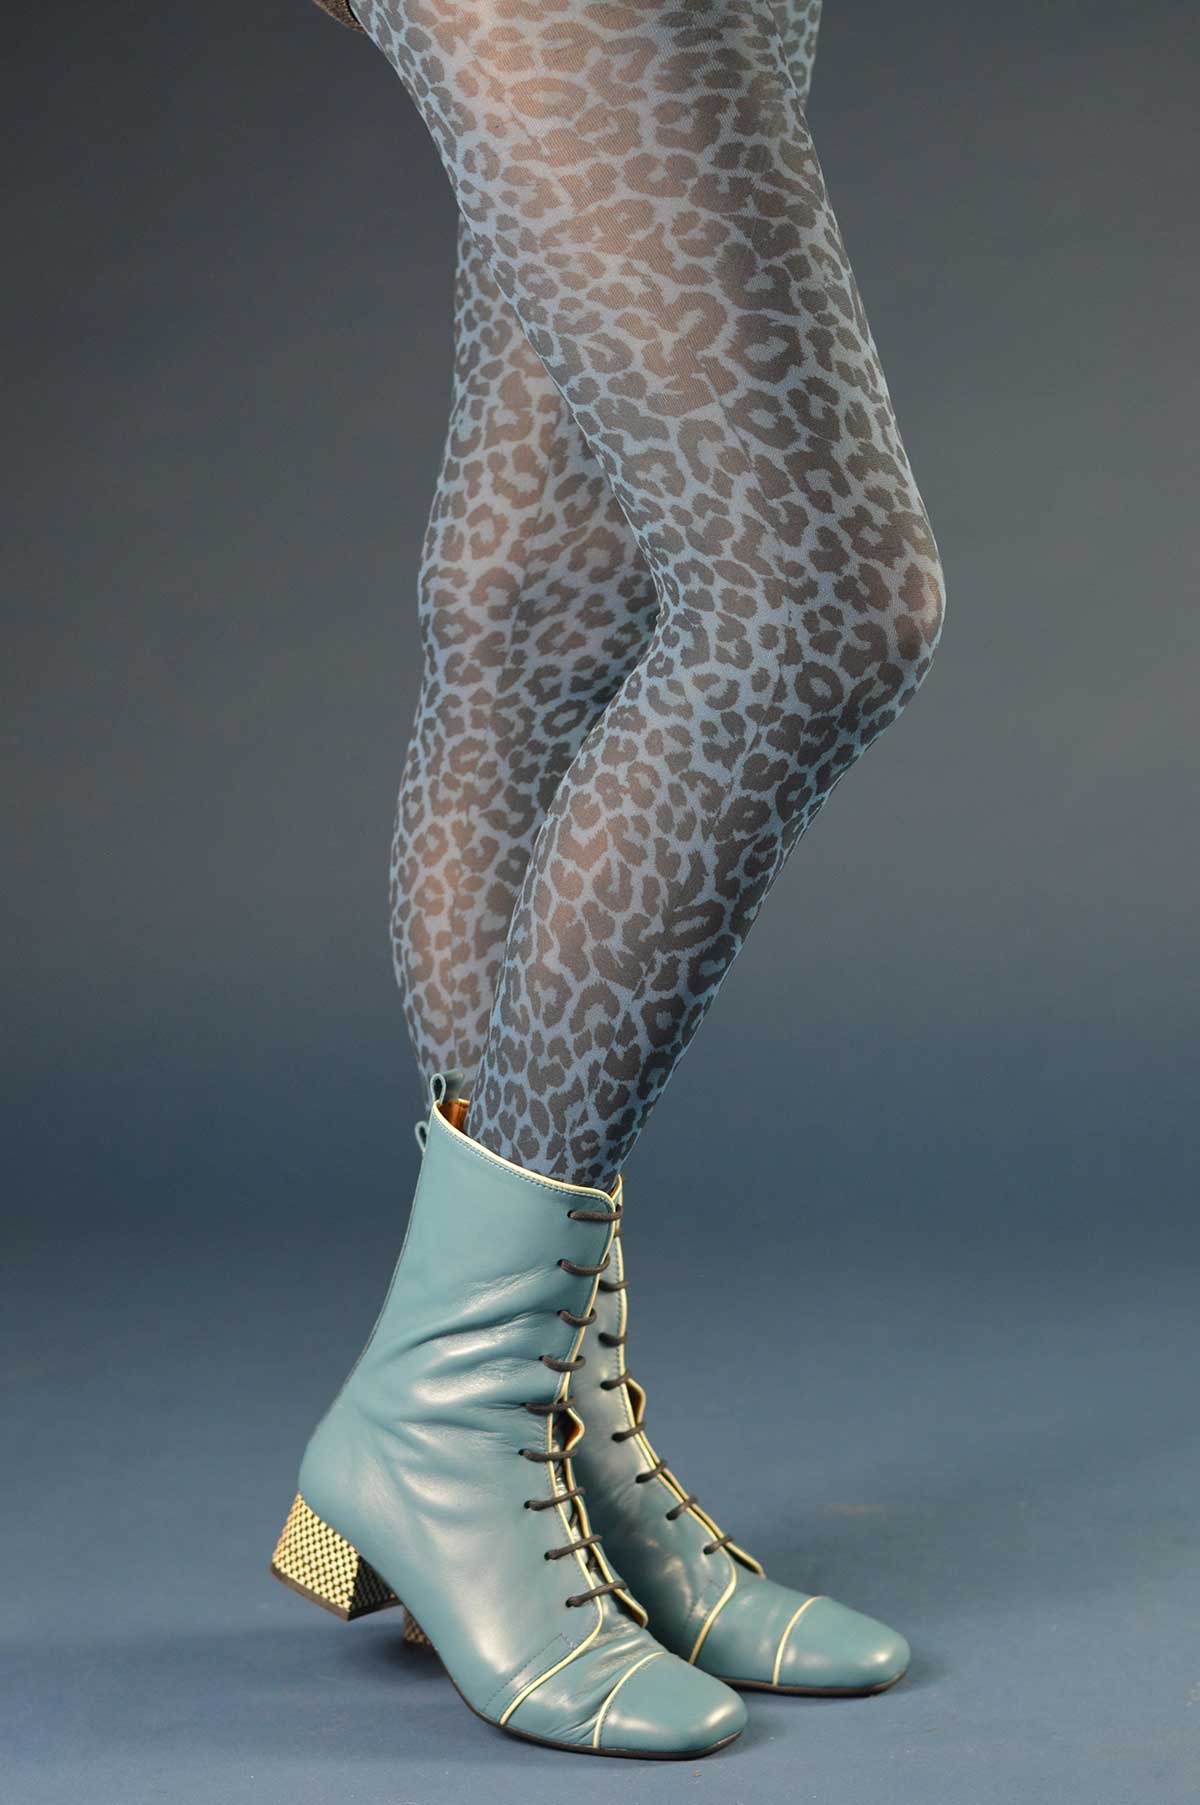 Small Leopard Print Tights in Denim – Women's vintage retro 60s – 70s style  – Mod Shoes